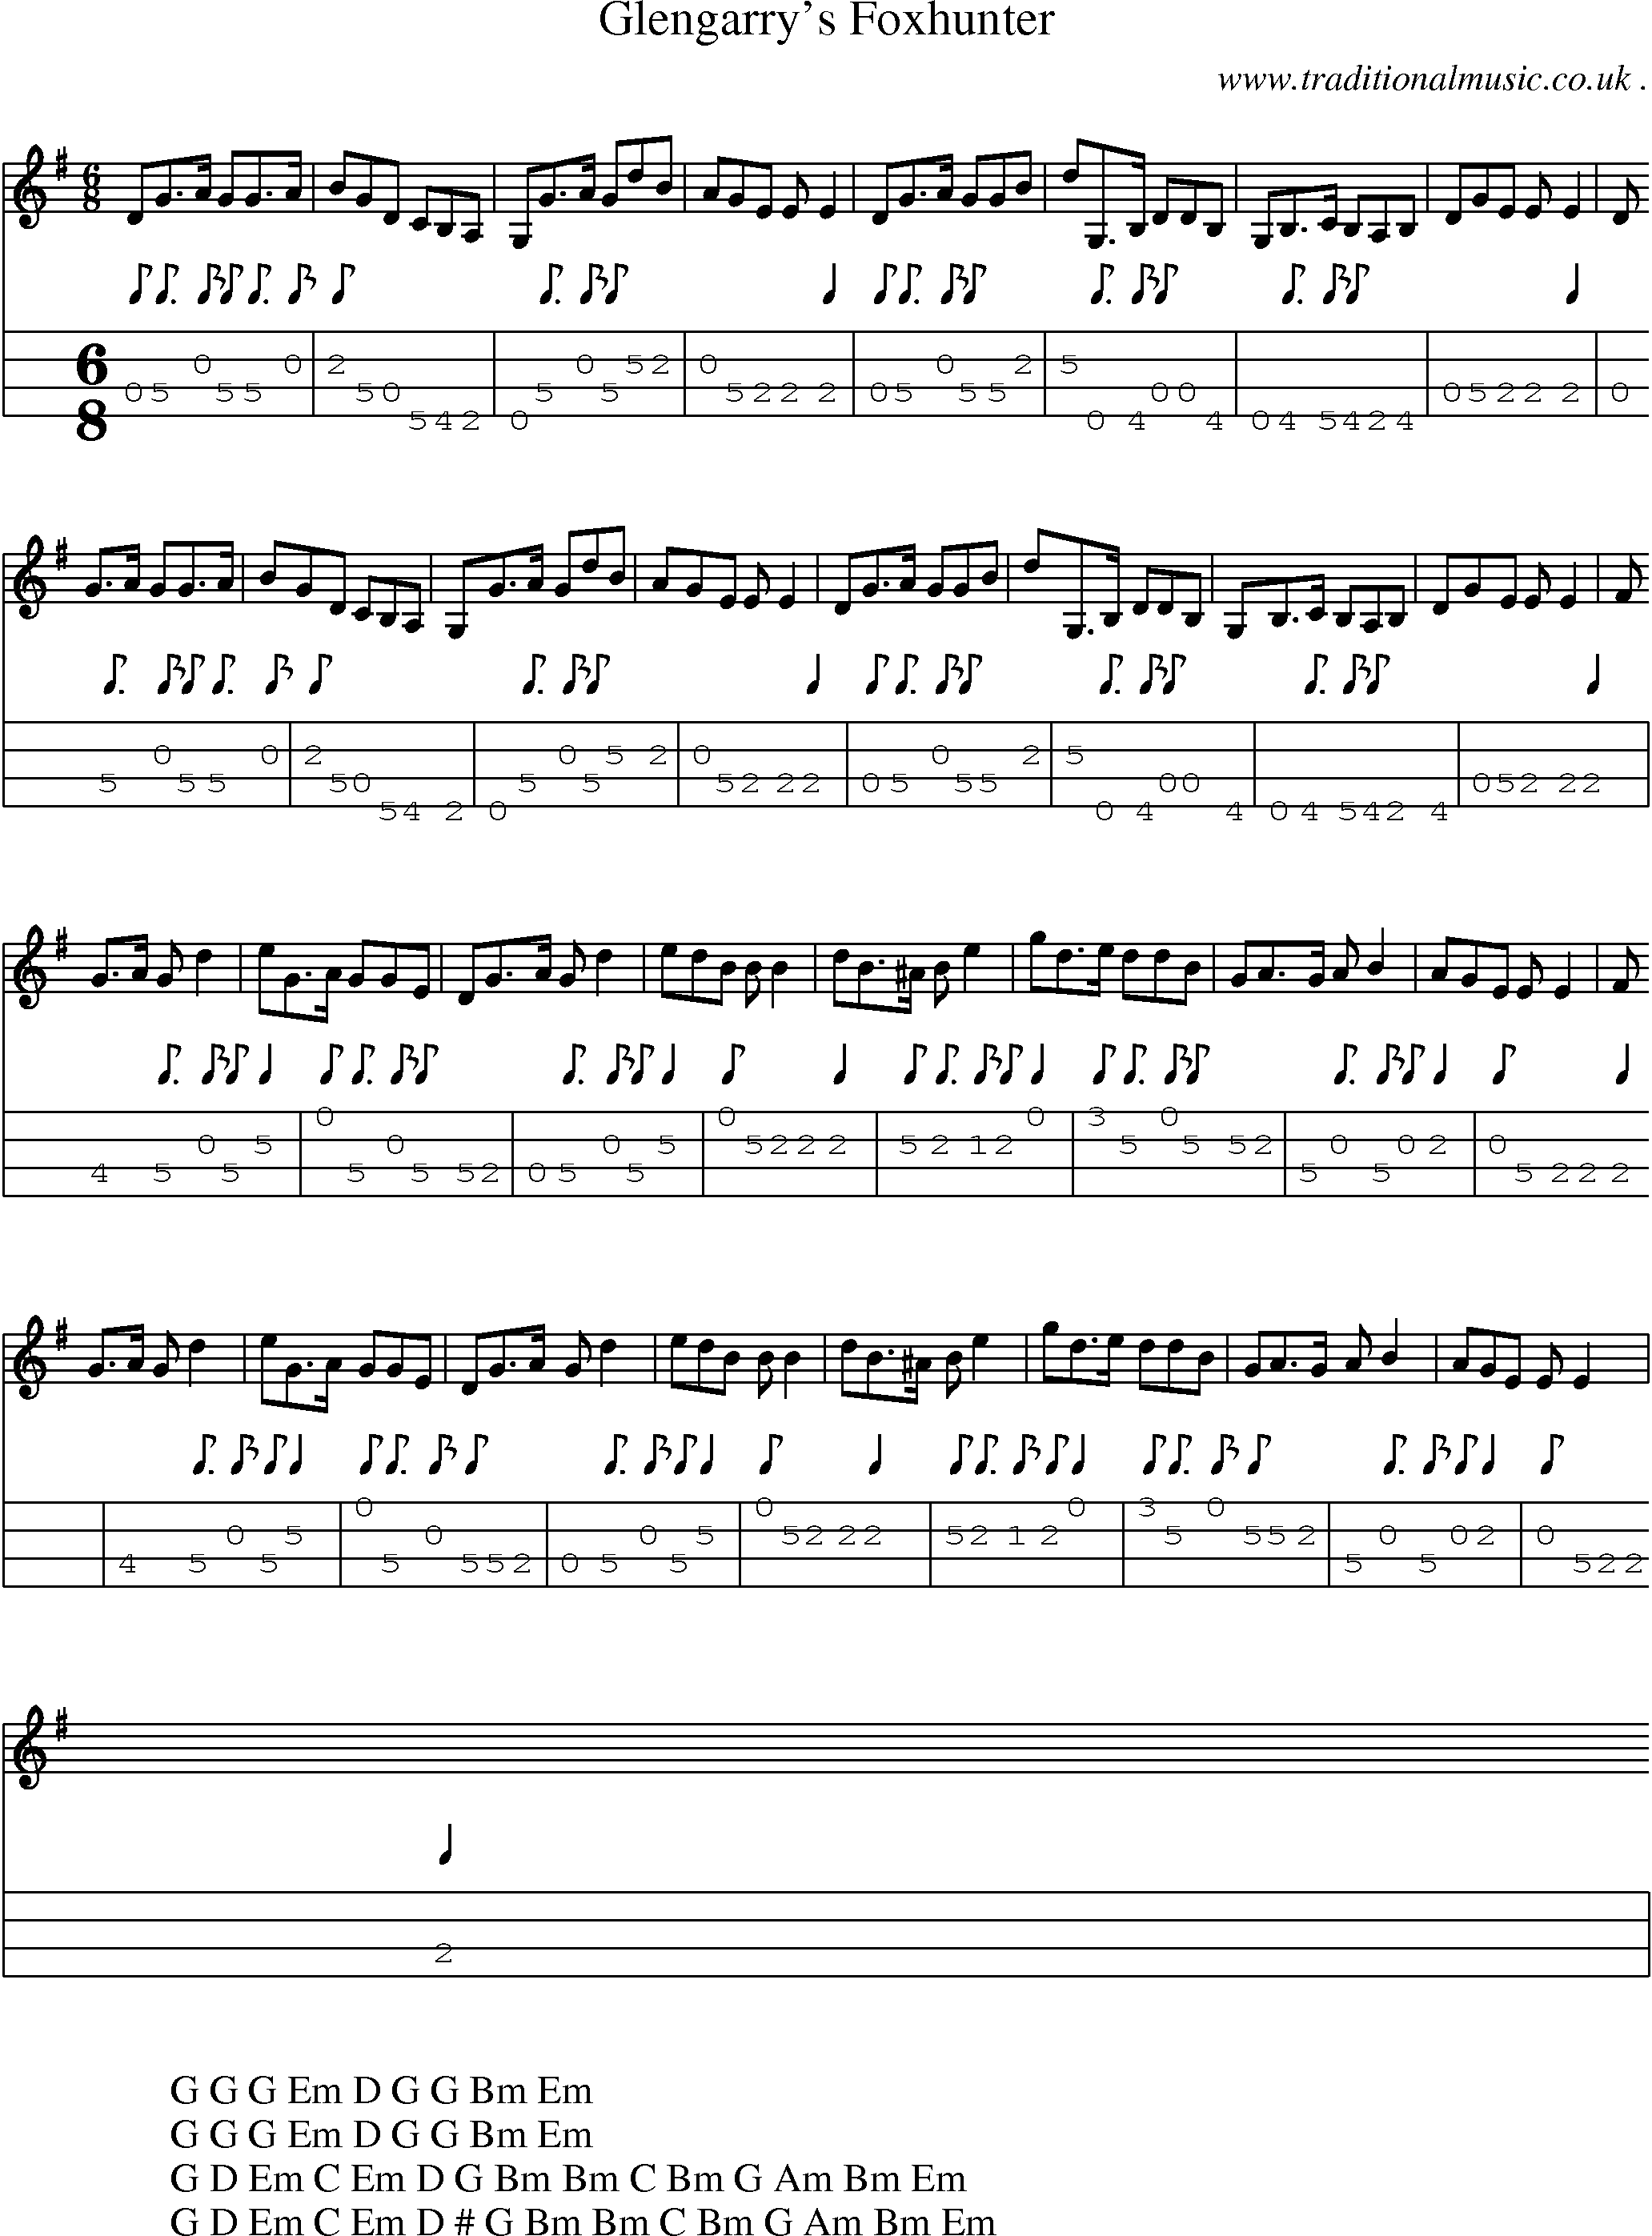 Sheet-music  score, Chords and Mandolin Tabs for Glengarrys Foxhunter